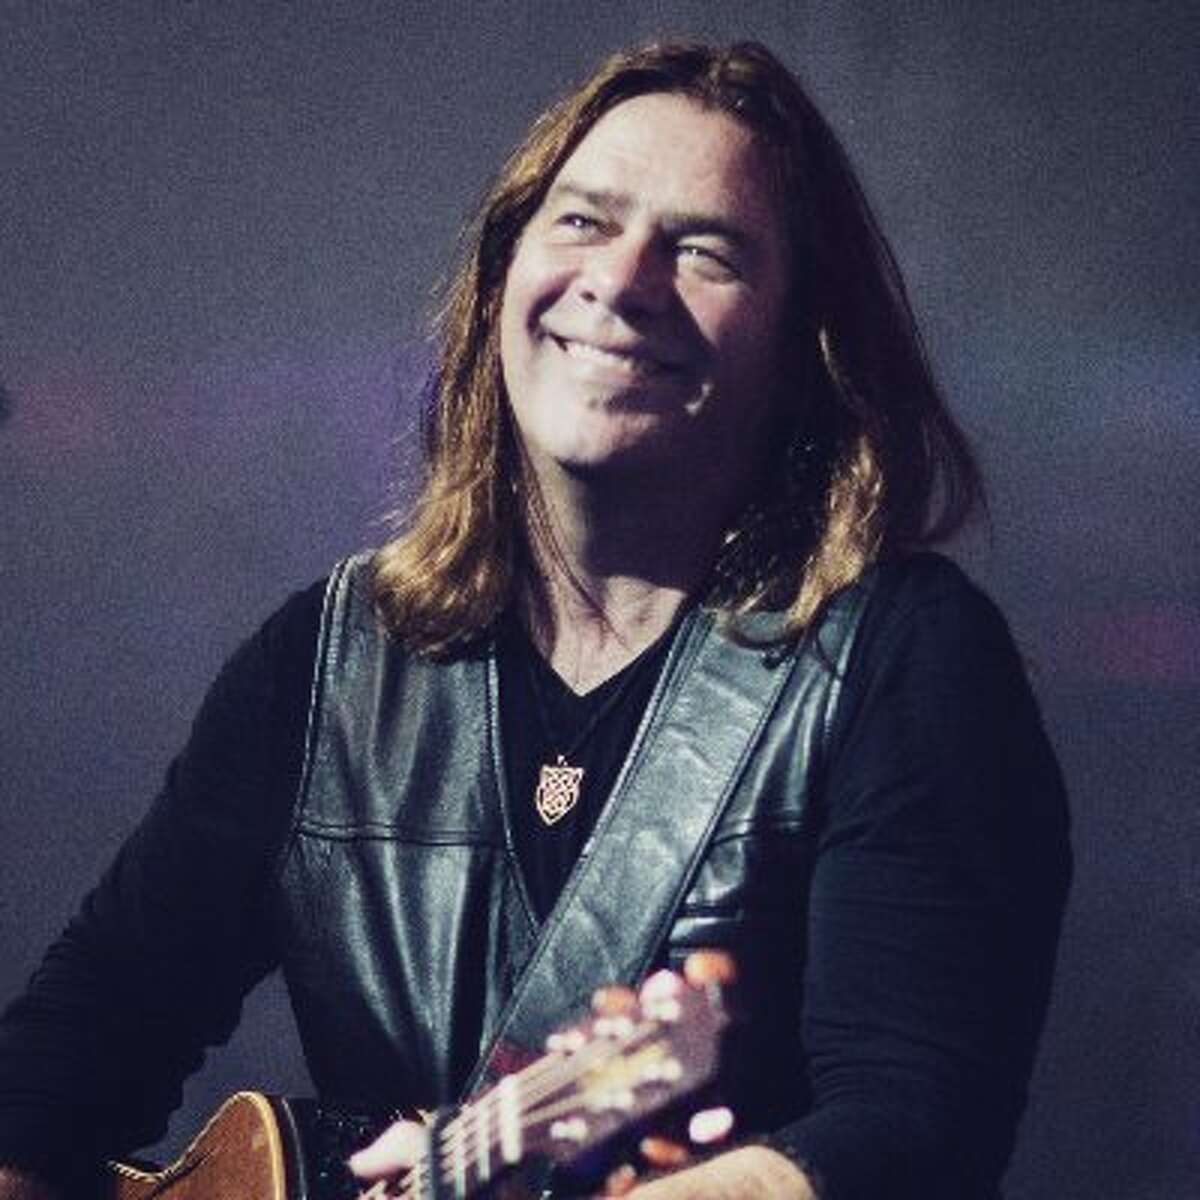 Alan Doyle will perform at the Wildey Theatre, 252 N. Main St., in Edwardsville from 8-11 p.m. Friday, April 22.